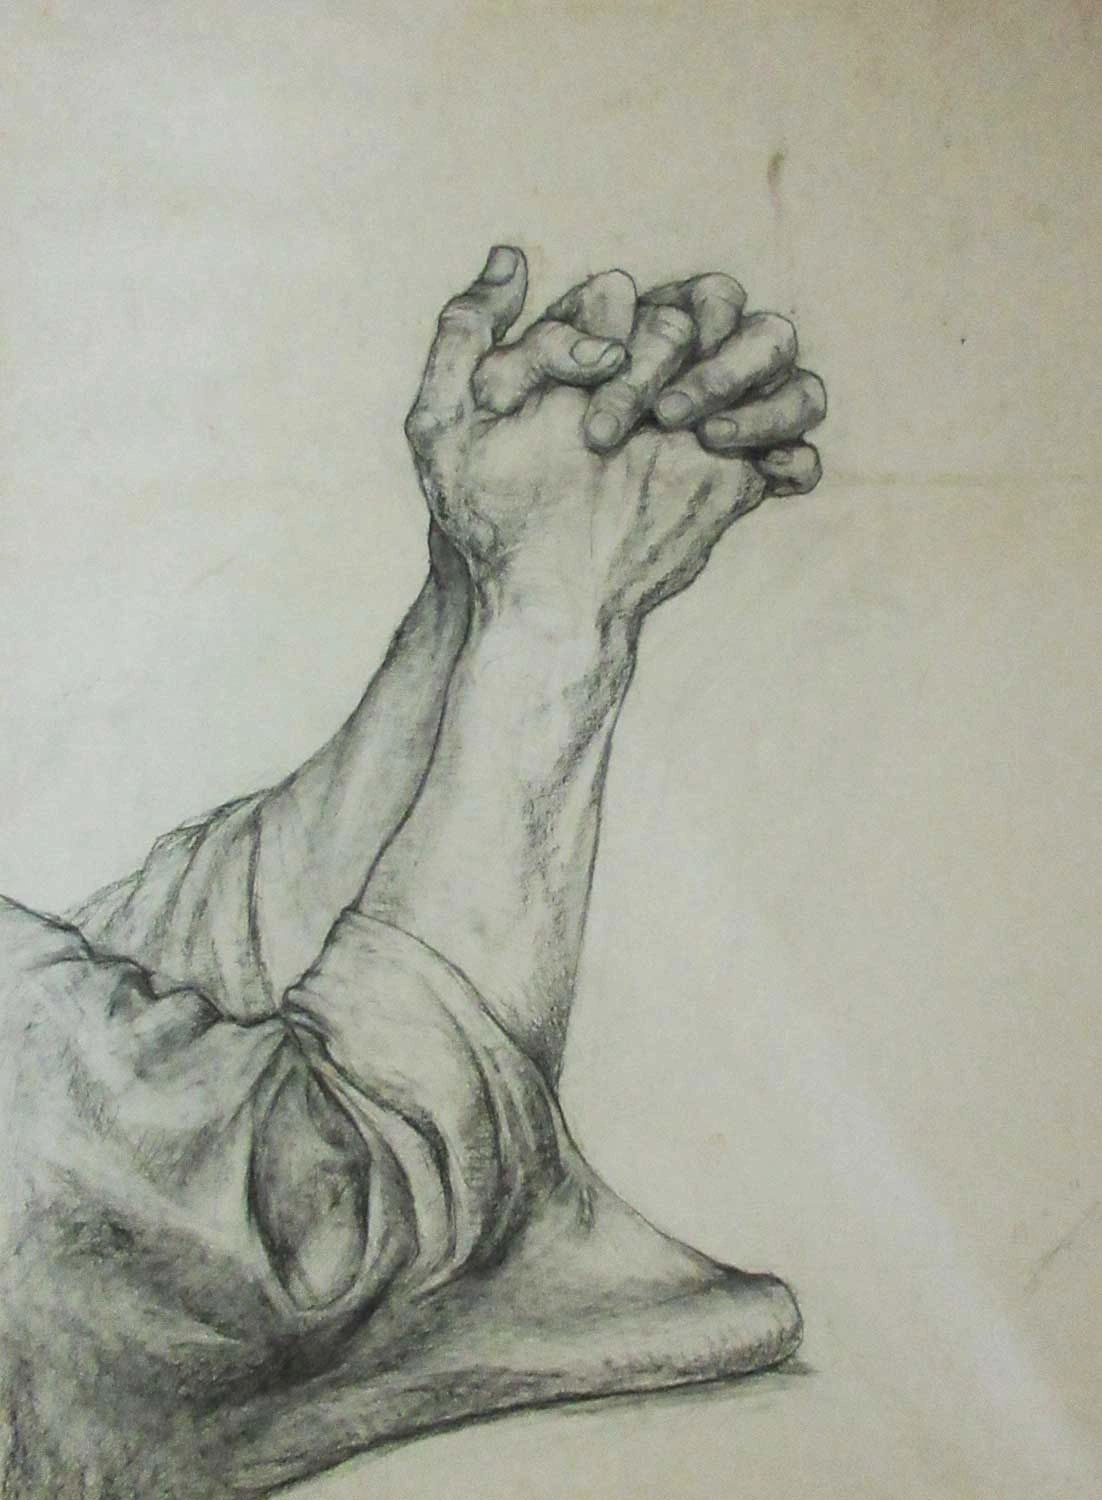 Charcoal study of praying hands.